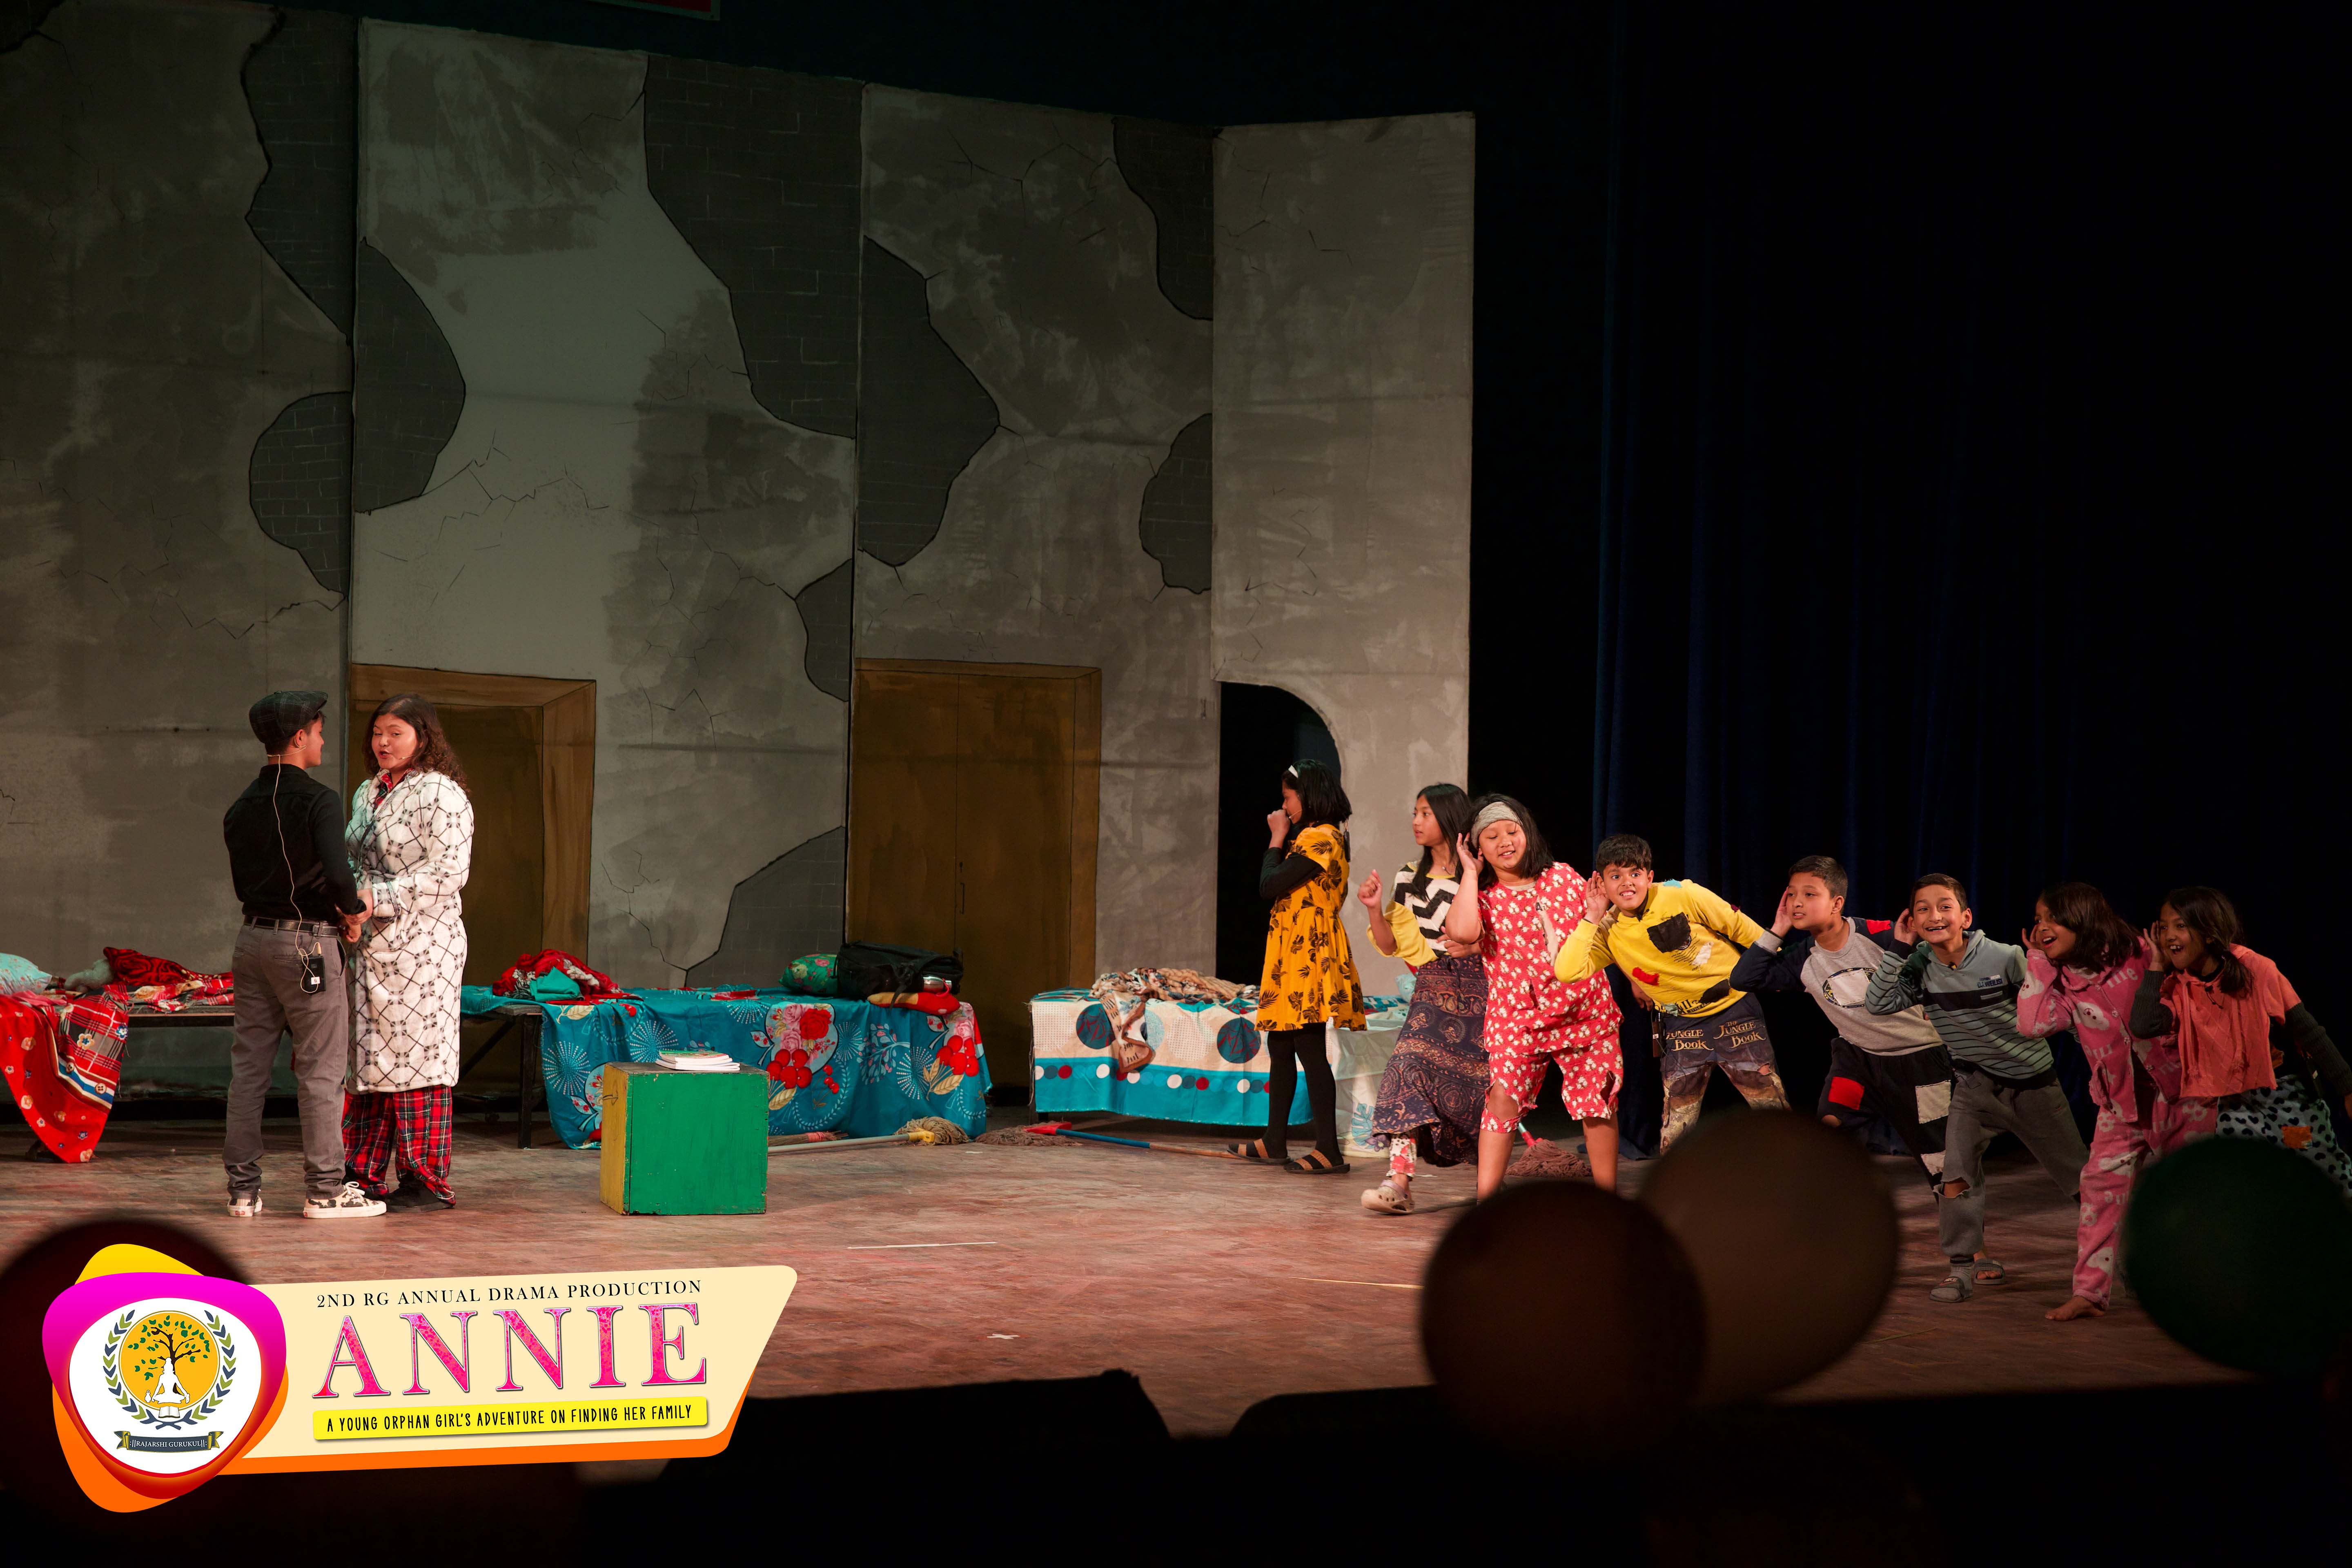 Agonies of an orphan explored in drama ‘Annie’